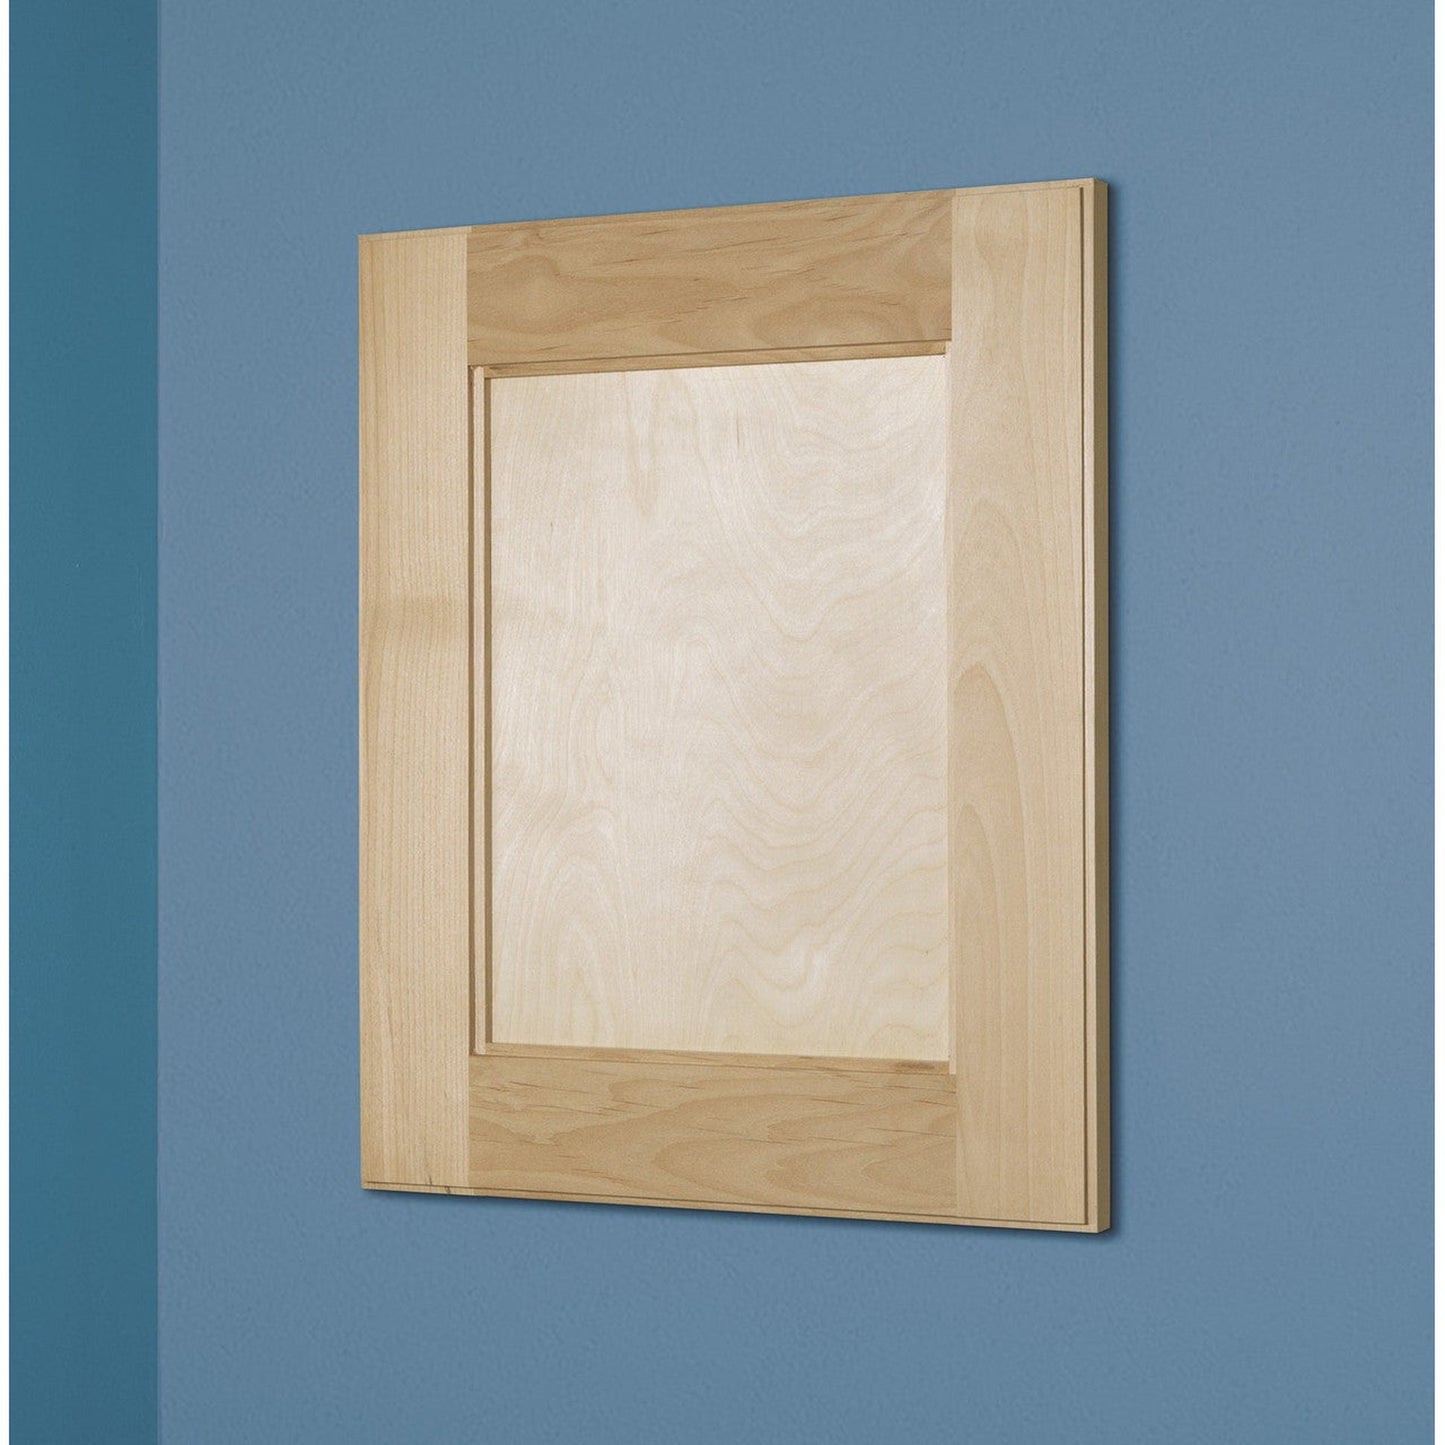 Fox Hollow Furnishings 14" x 18" Unfinished Style Beadboard White Interior Special 6" Depth Recessed Medicine Cabinet With Mirror